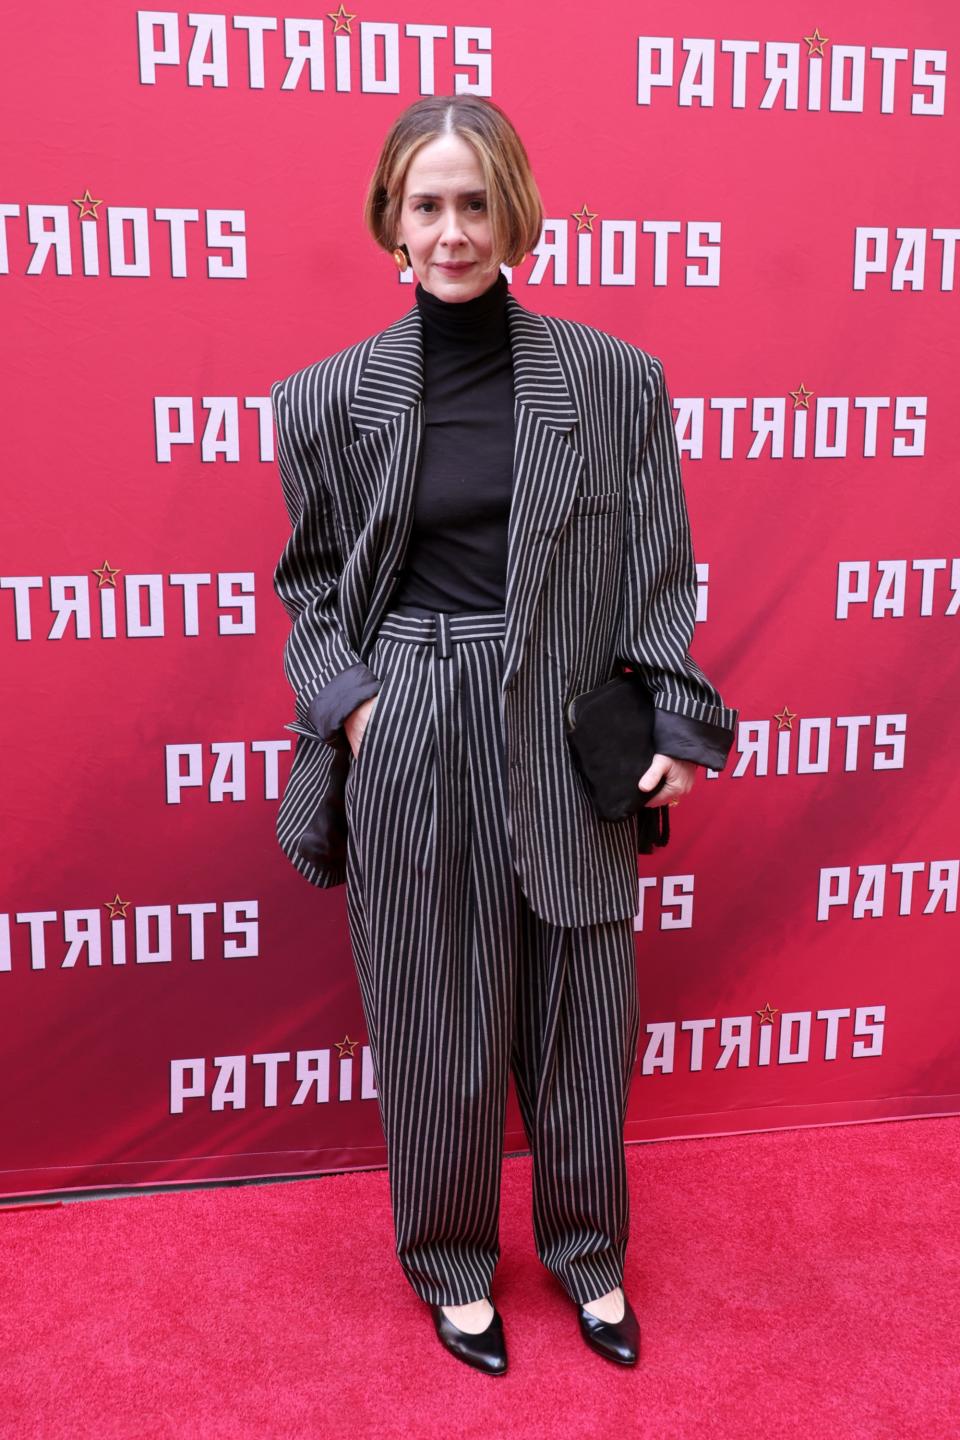 Sarah Paulson at the "Patriots" opening night on Broadway on April 22.